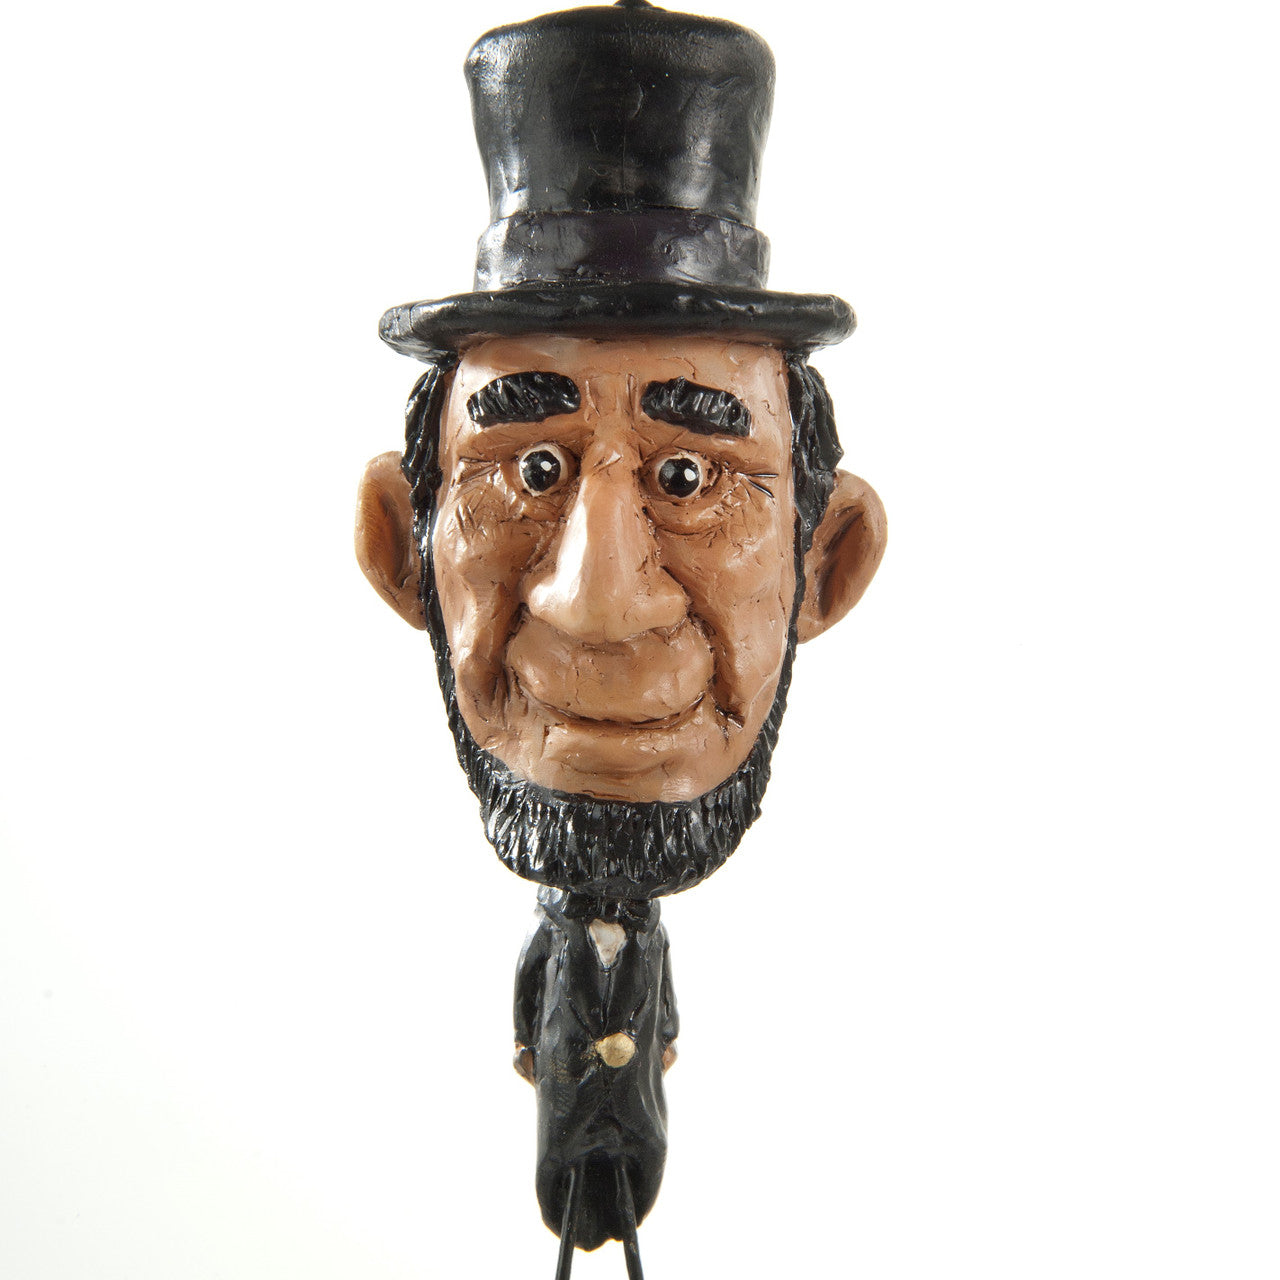 Bac 702 Abe Lincoln Ornament Set of 3